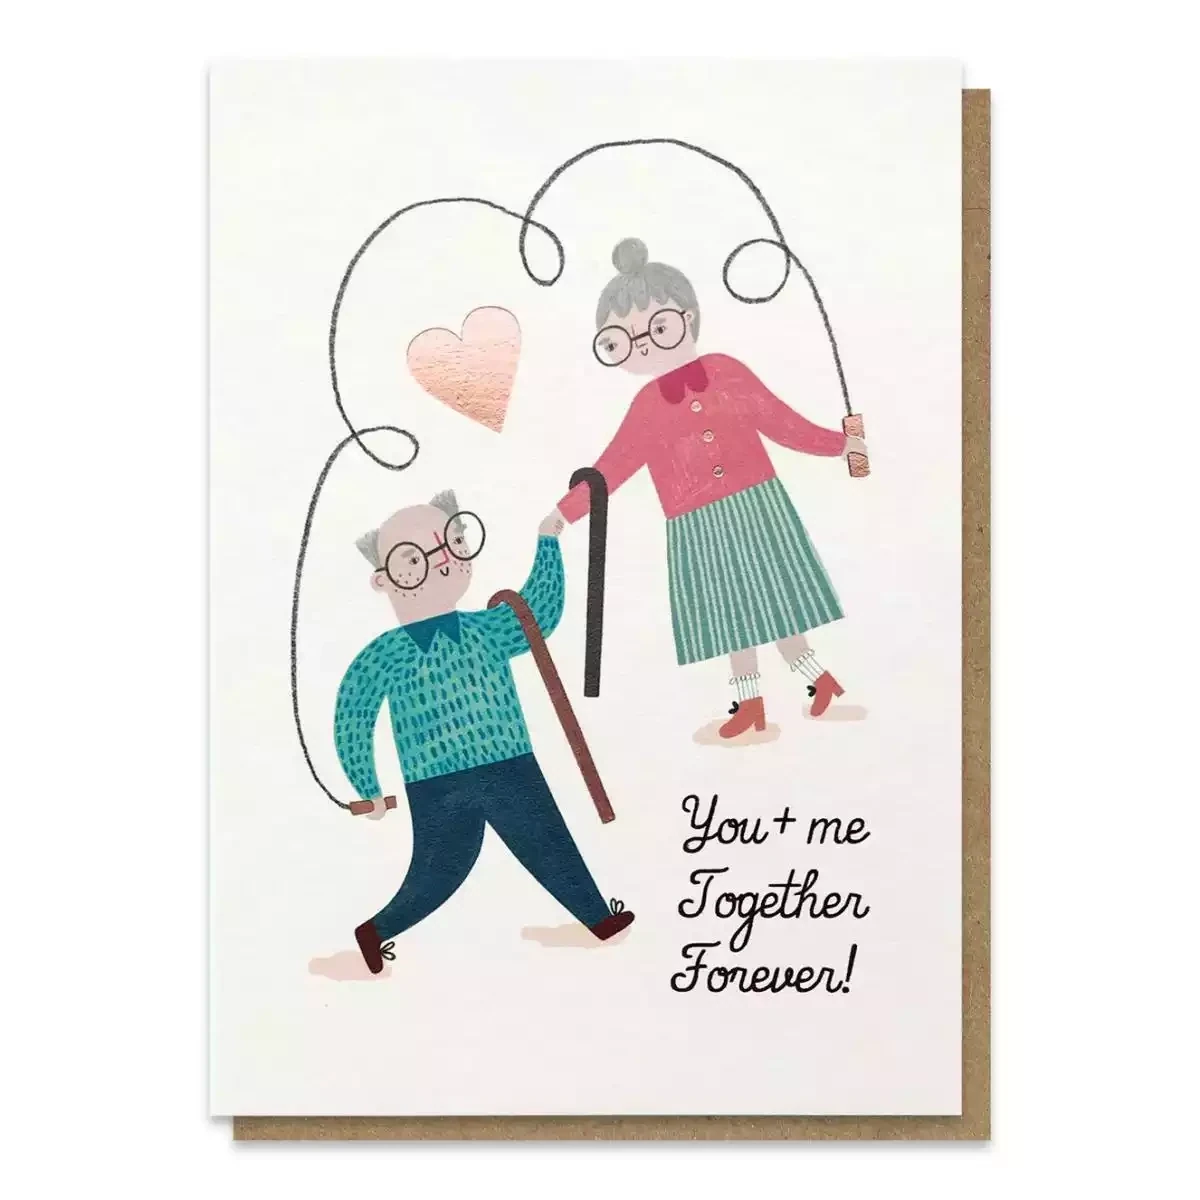 You + Me Together Forever Card by Stormy Knight